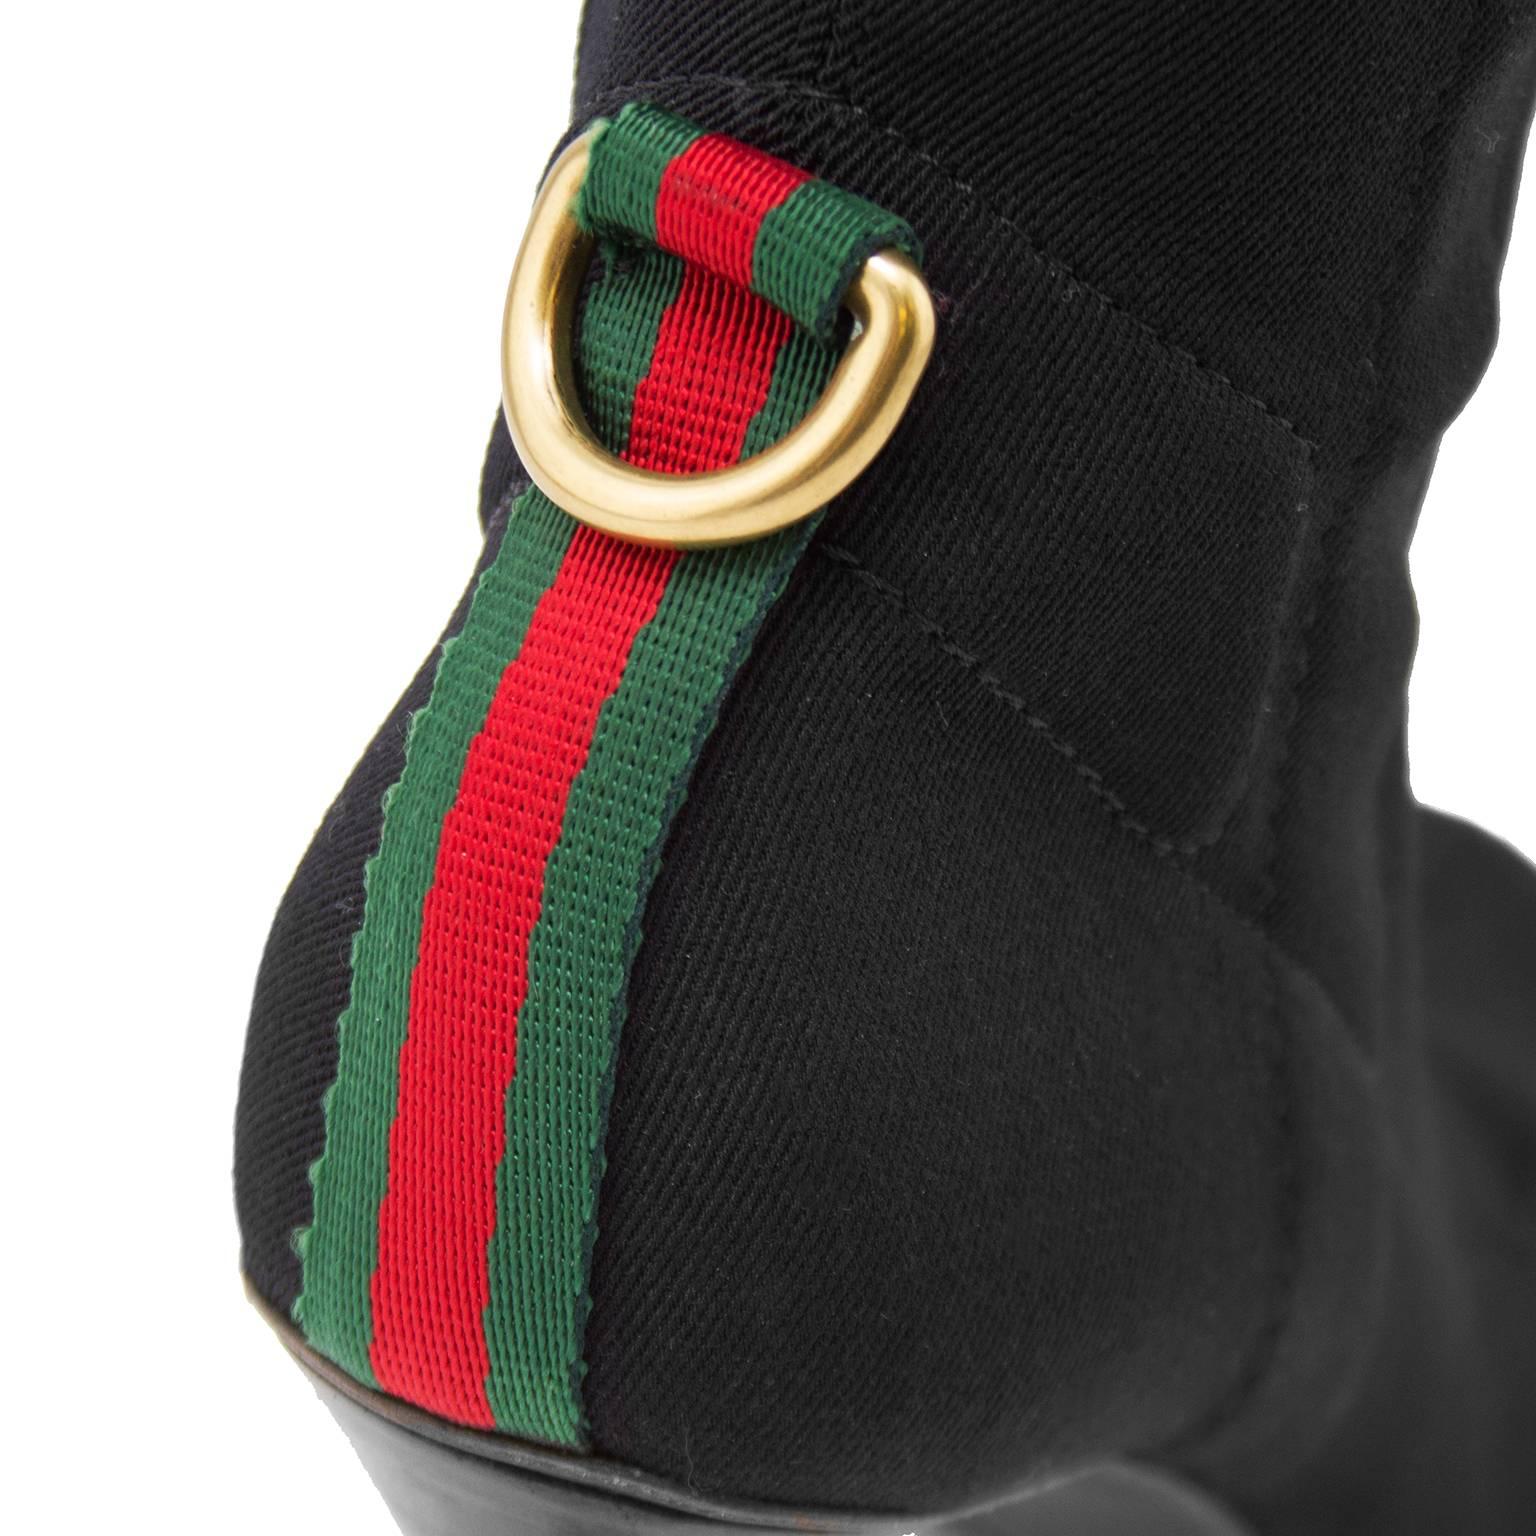 1990s Gucci black spandex knee high boots. Tonal black top stitching throughout. Classic Gucci green and red ribbon detail at heels with gold tone D ring. Black leather trim at top. Zipper at interior sides. 3